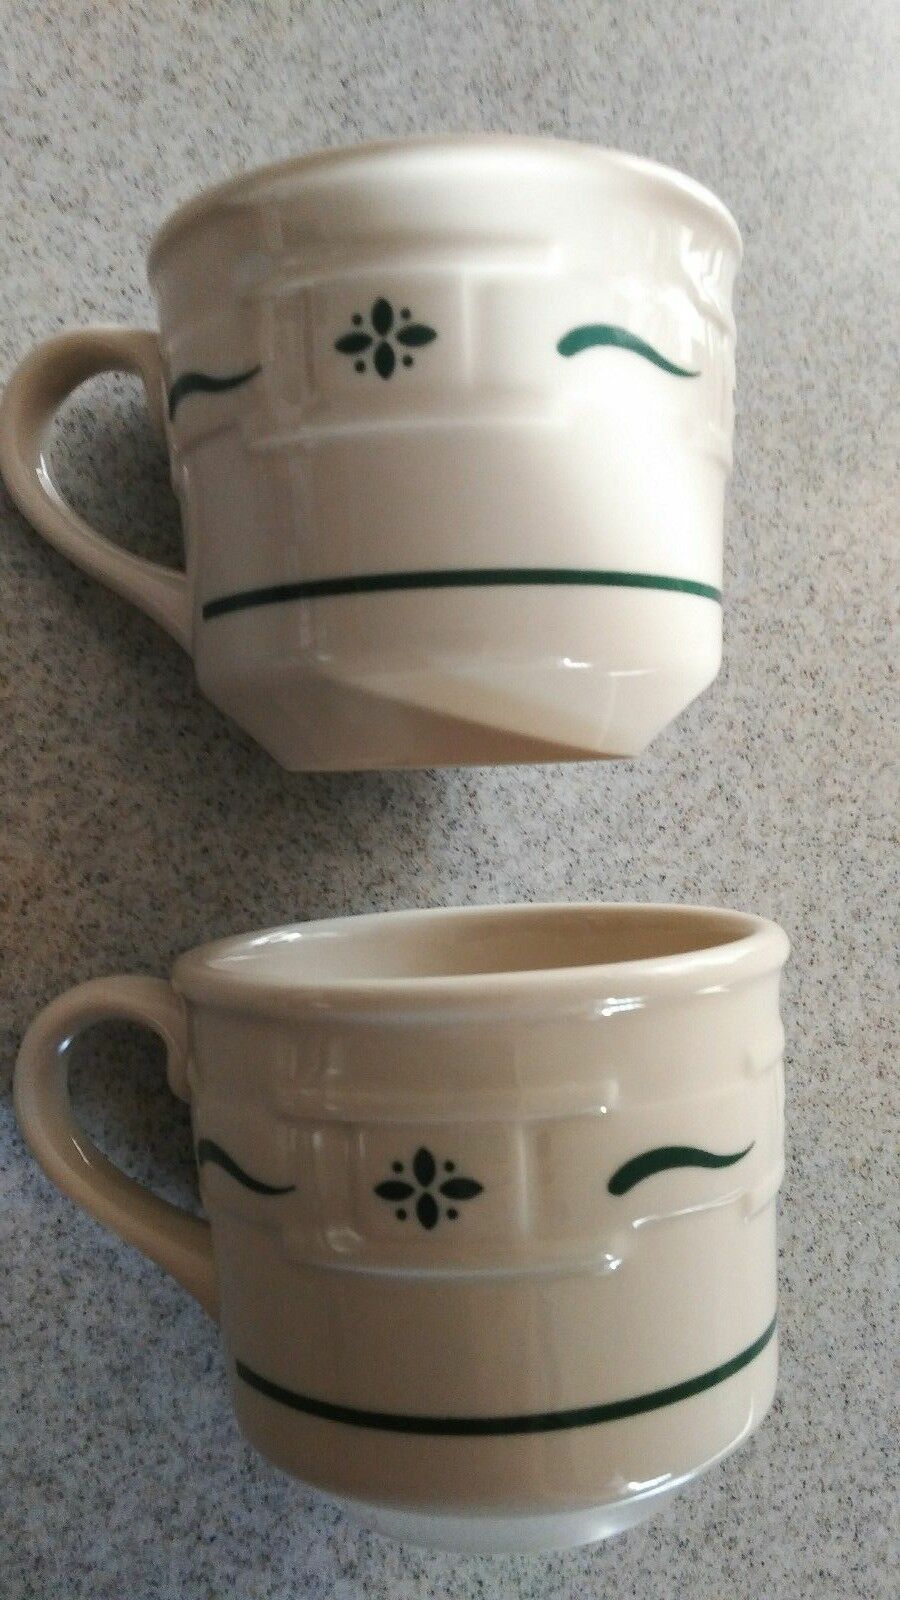 Longaberger Pottery lot of 2 Woven Traditions Green 8 oz mugs cups NEW